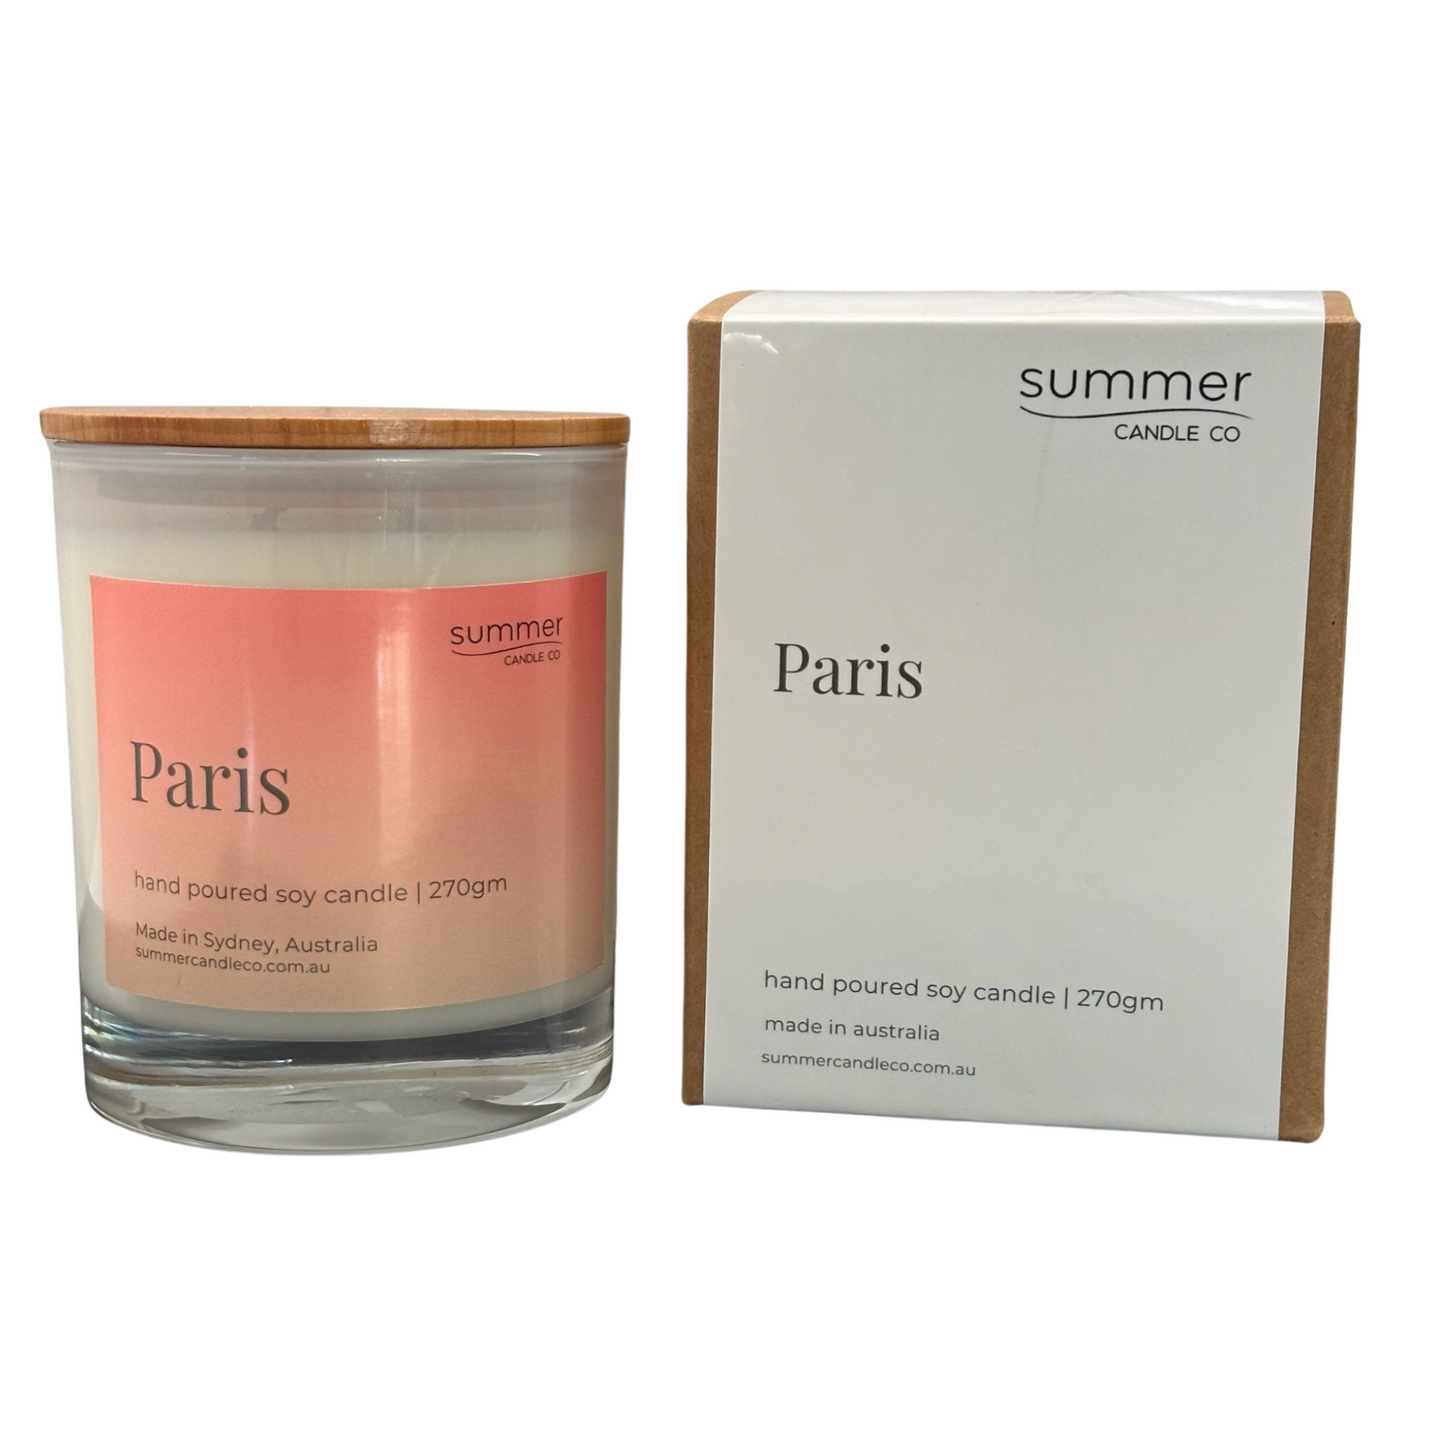 Lovely Hand Poured Soy Candle 270gram Fragrance of Paris with Gift Box